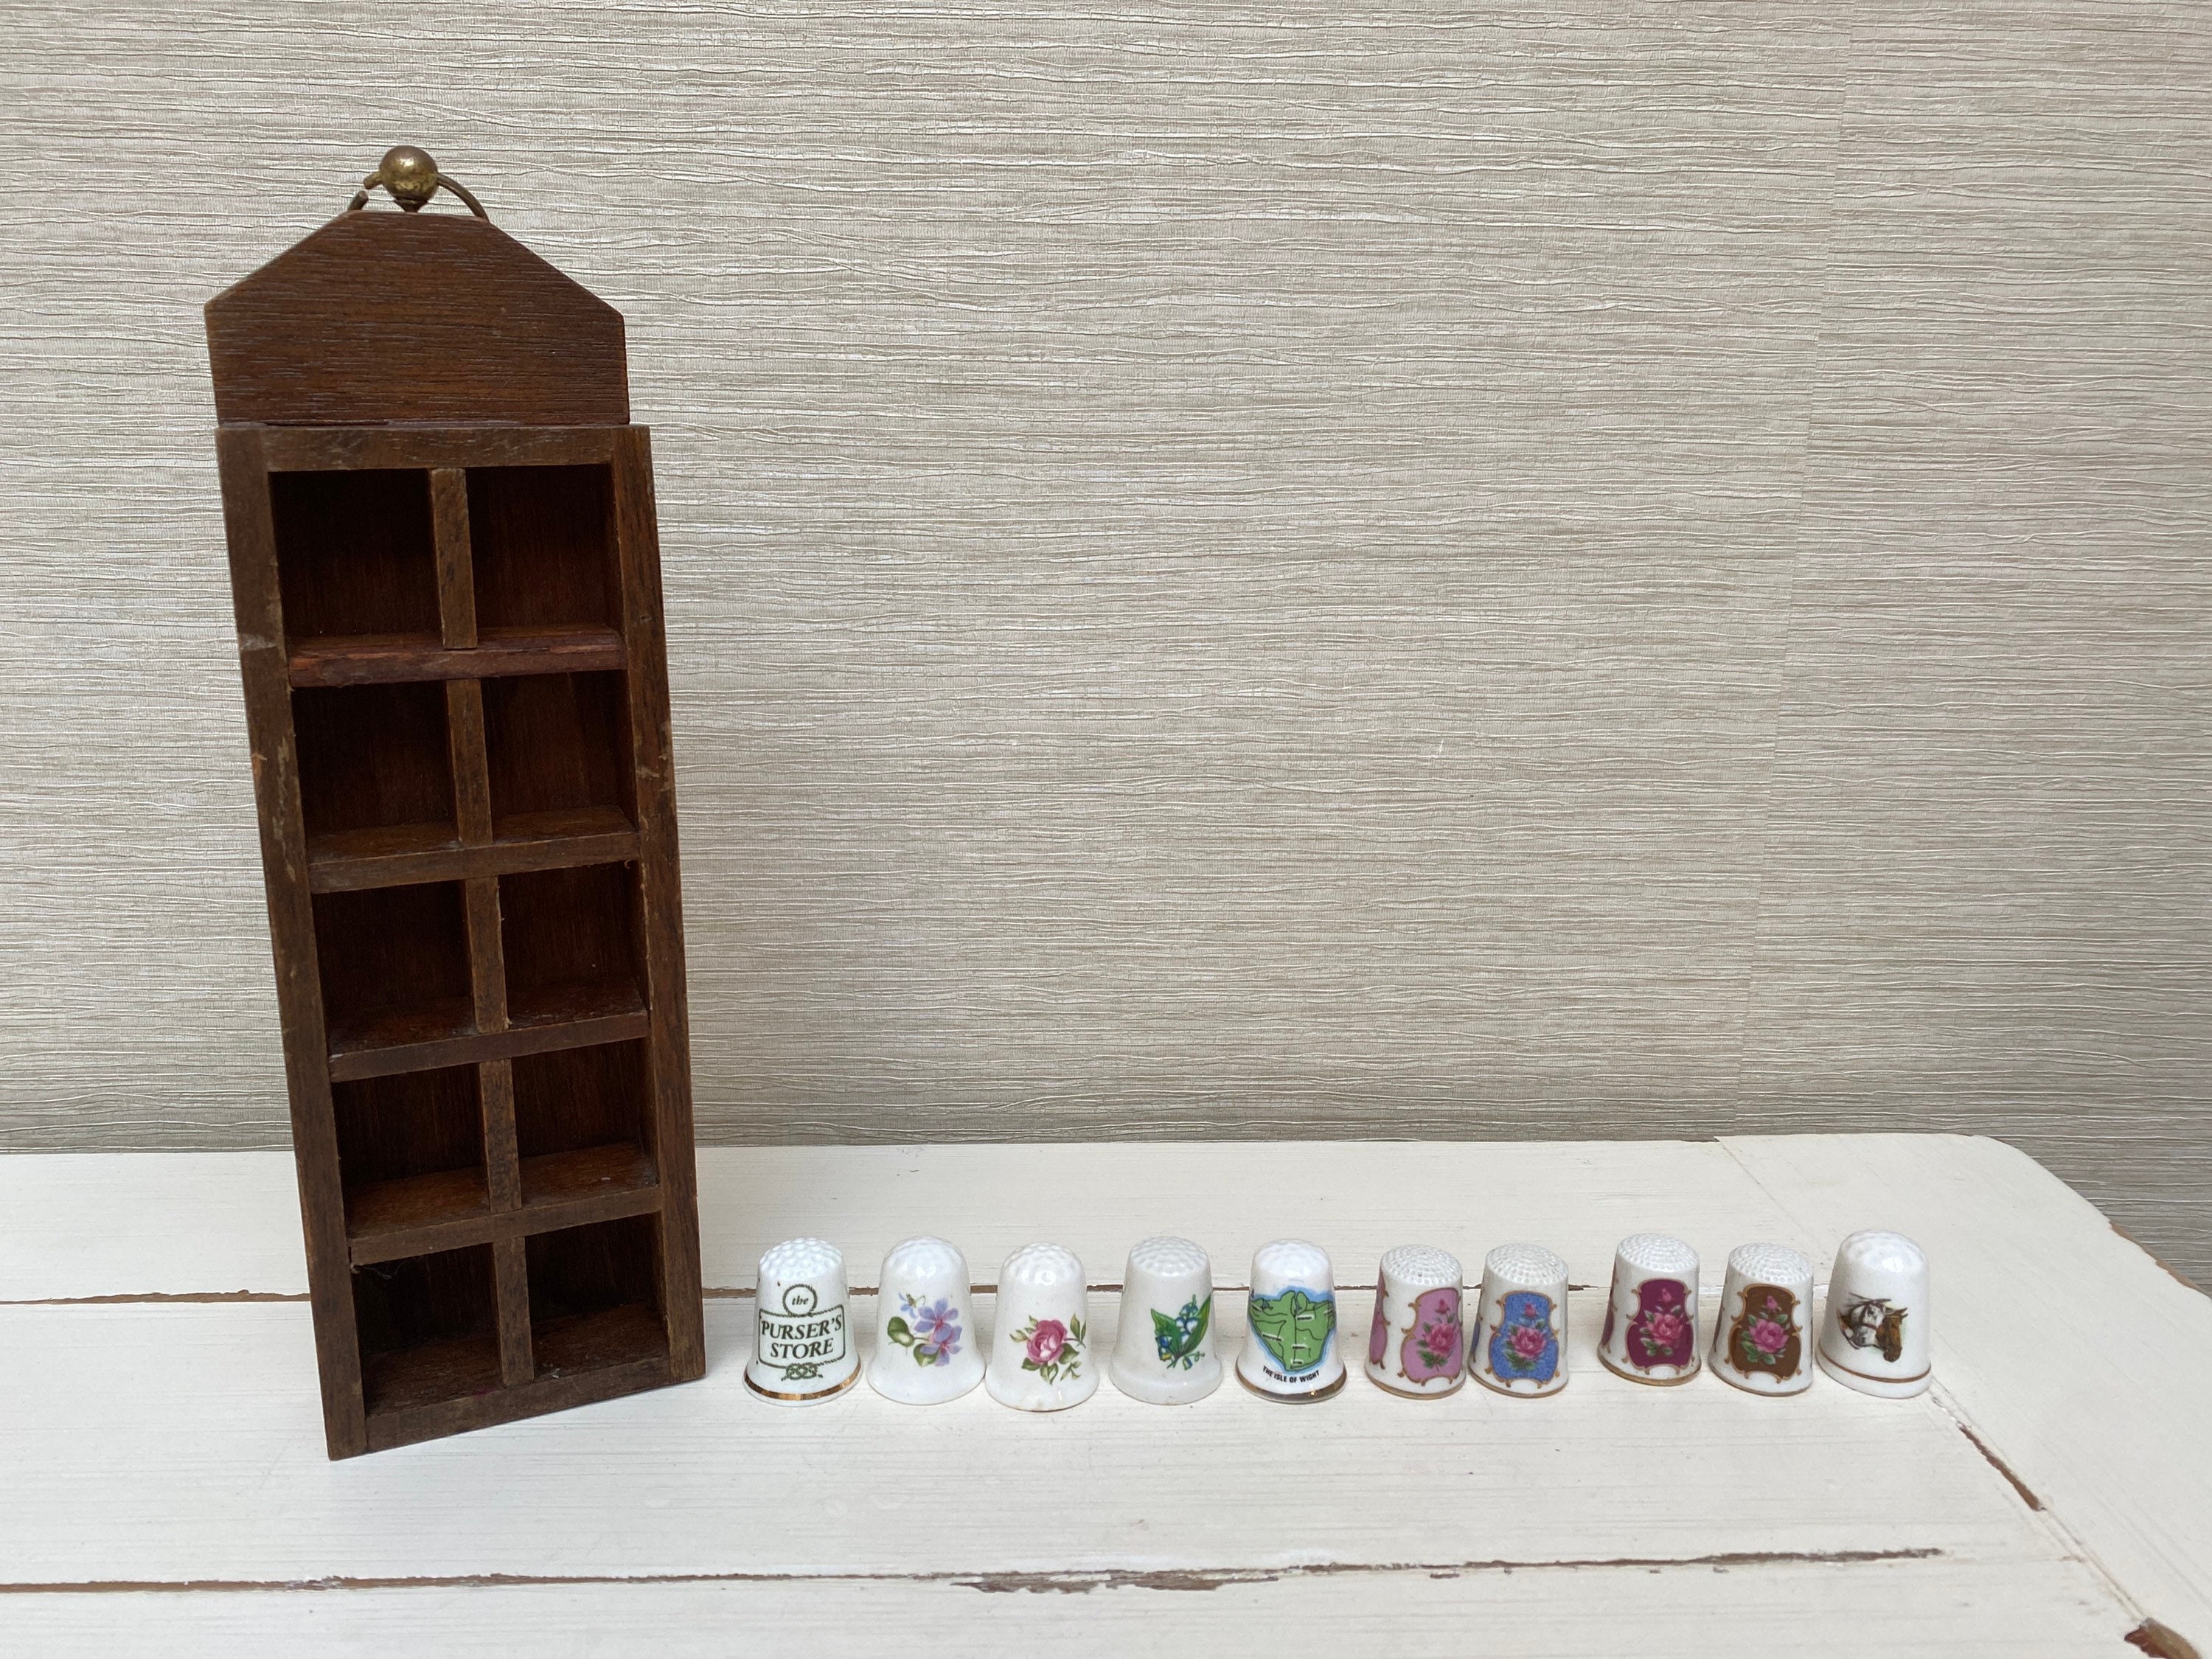 Vintage 10 Thimble Collection With Wooden Display Case, 7 3/4 Tall, Ceramic  Thimbles, Woodland Animals, Flowers, Hanging Display Case, Gift 